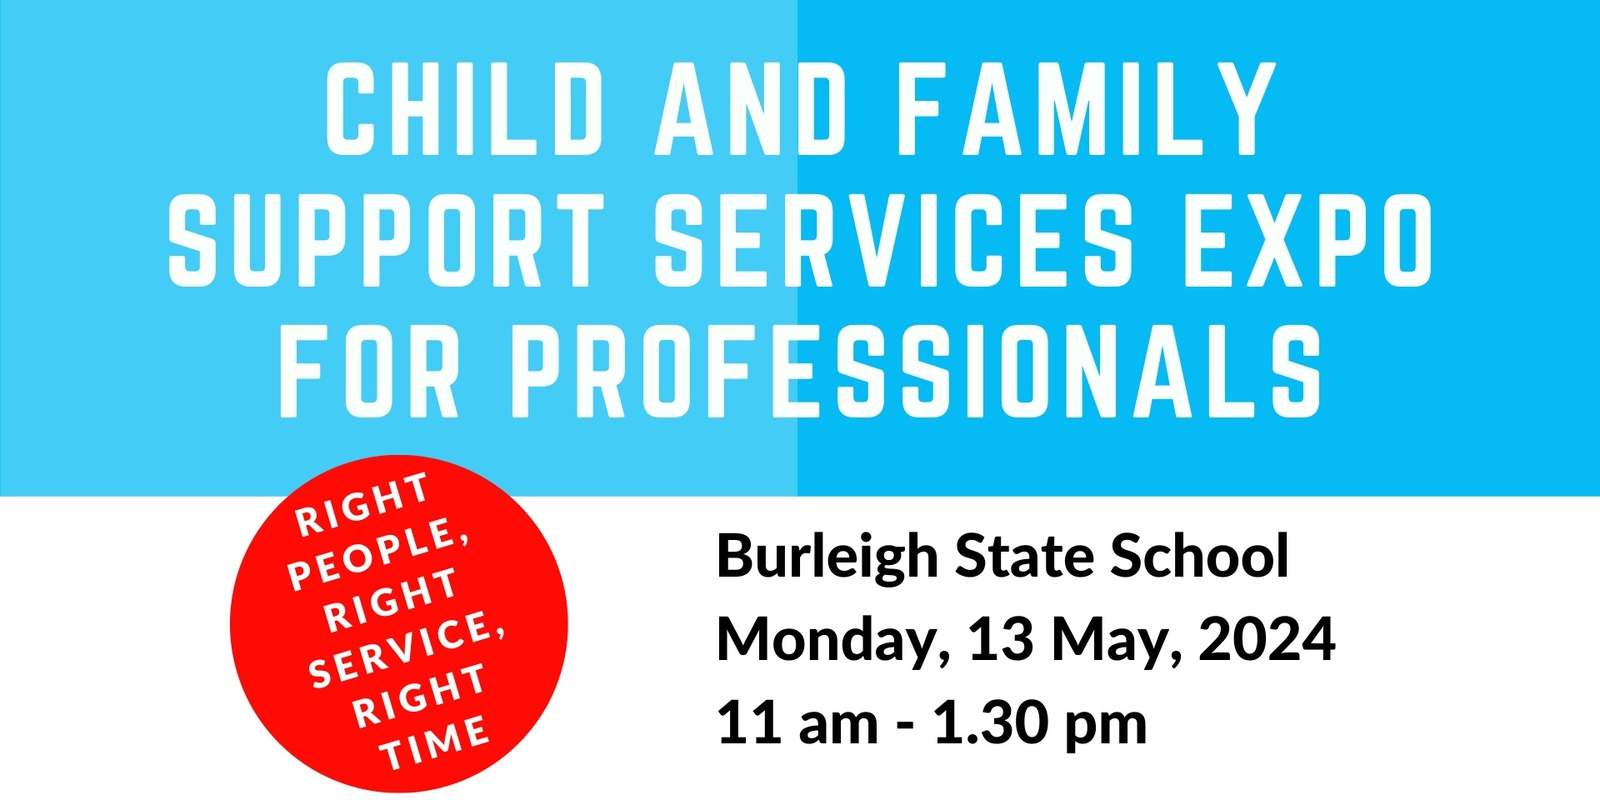 Banner image for 2024 GC Child and Family Services Expo for Professionals - Burleigh